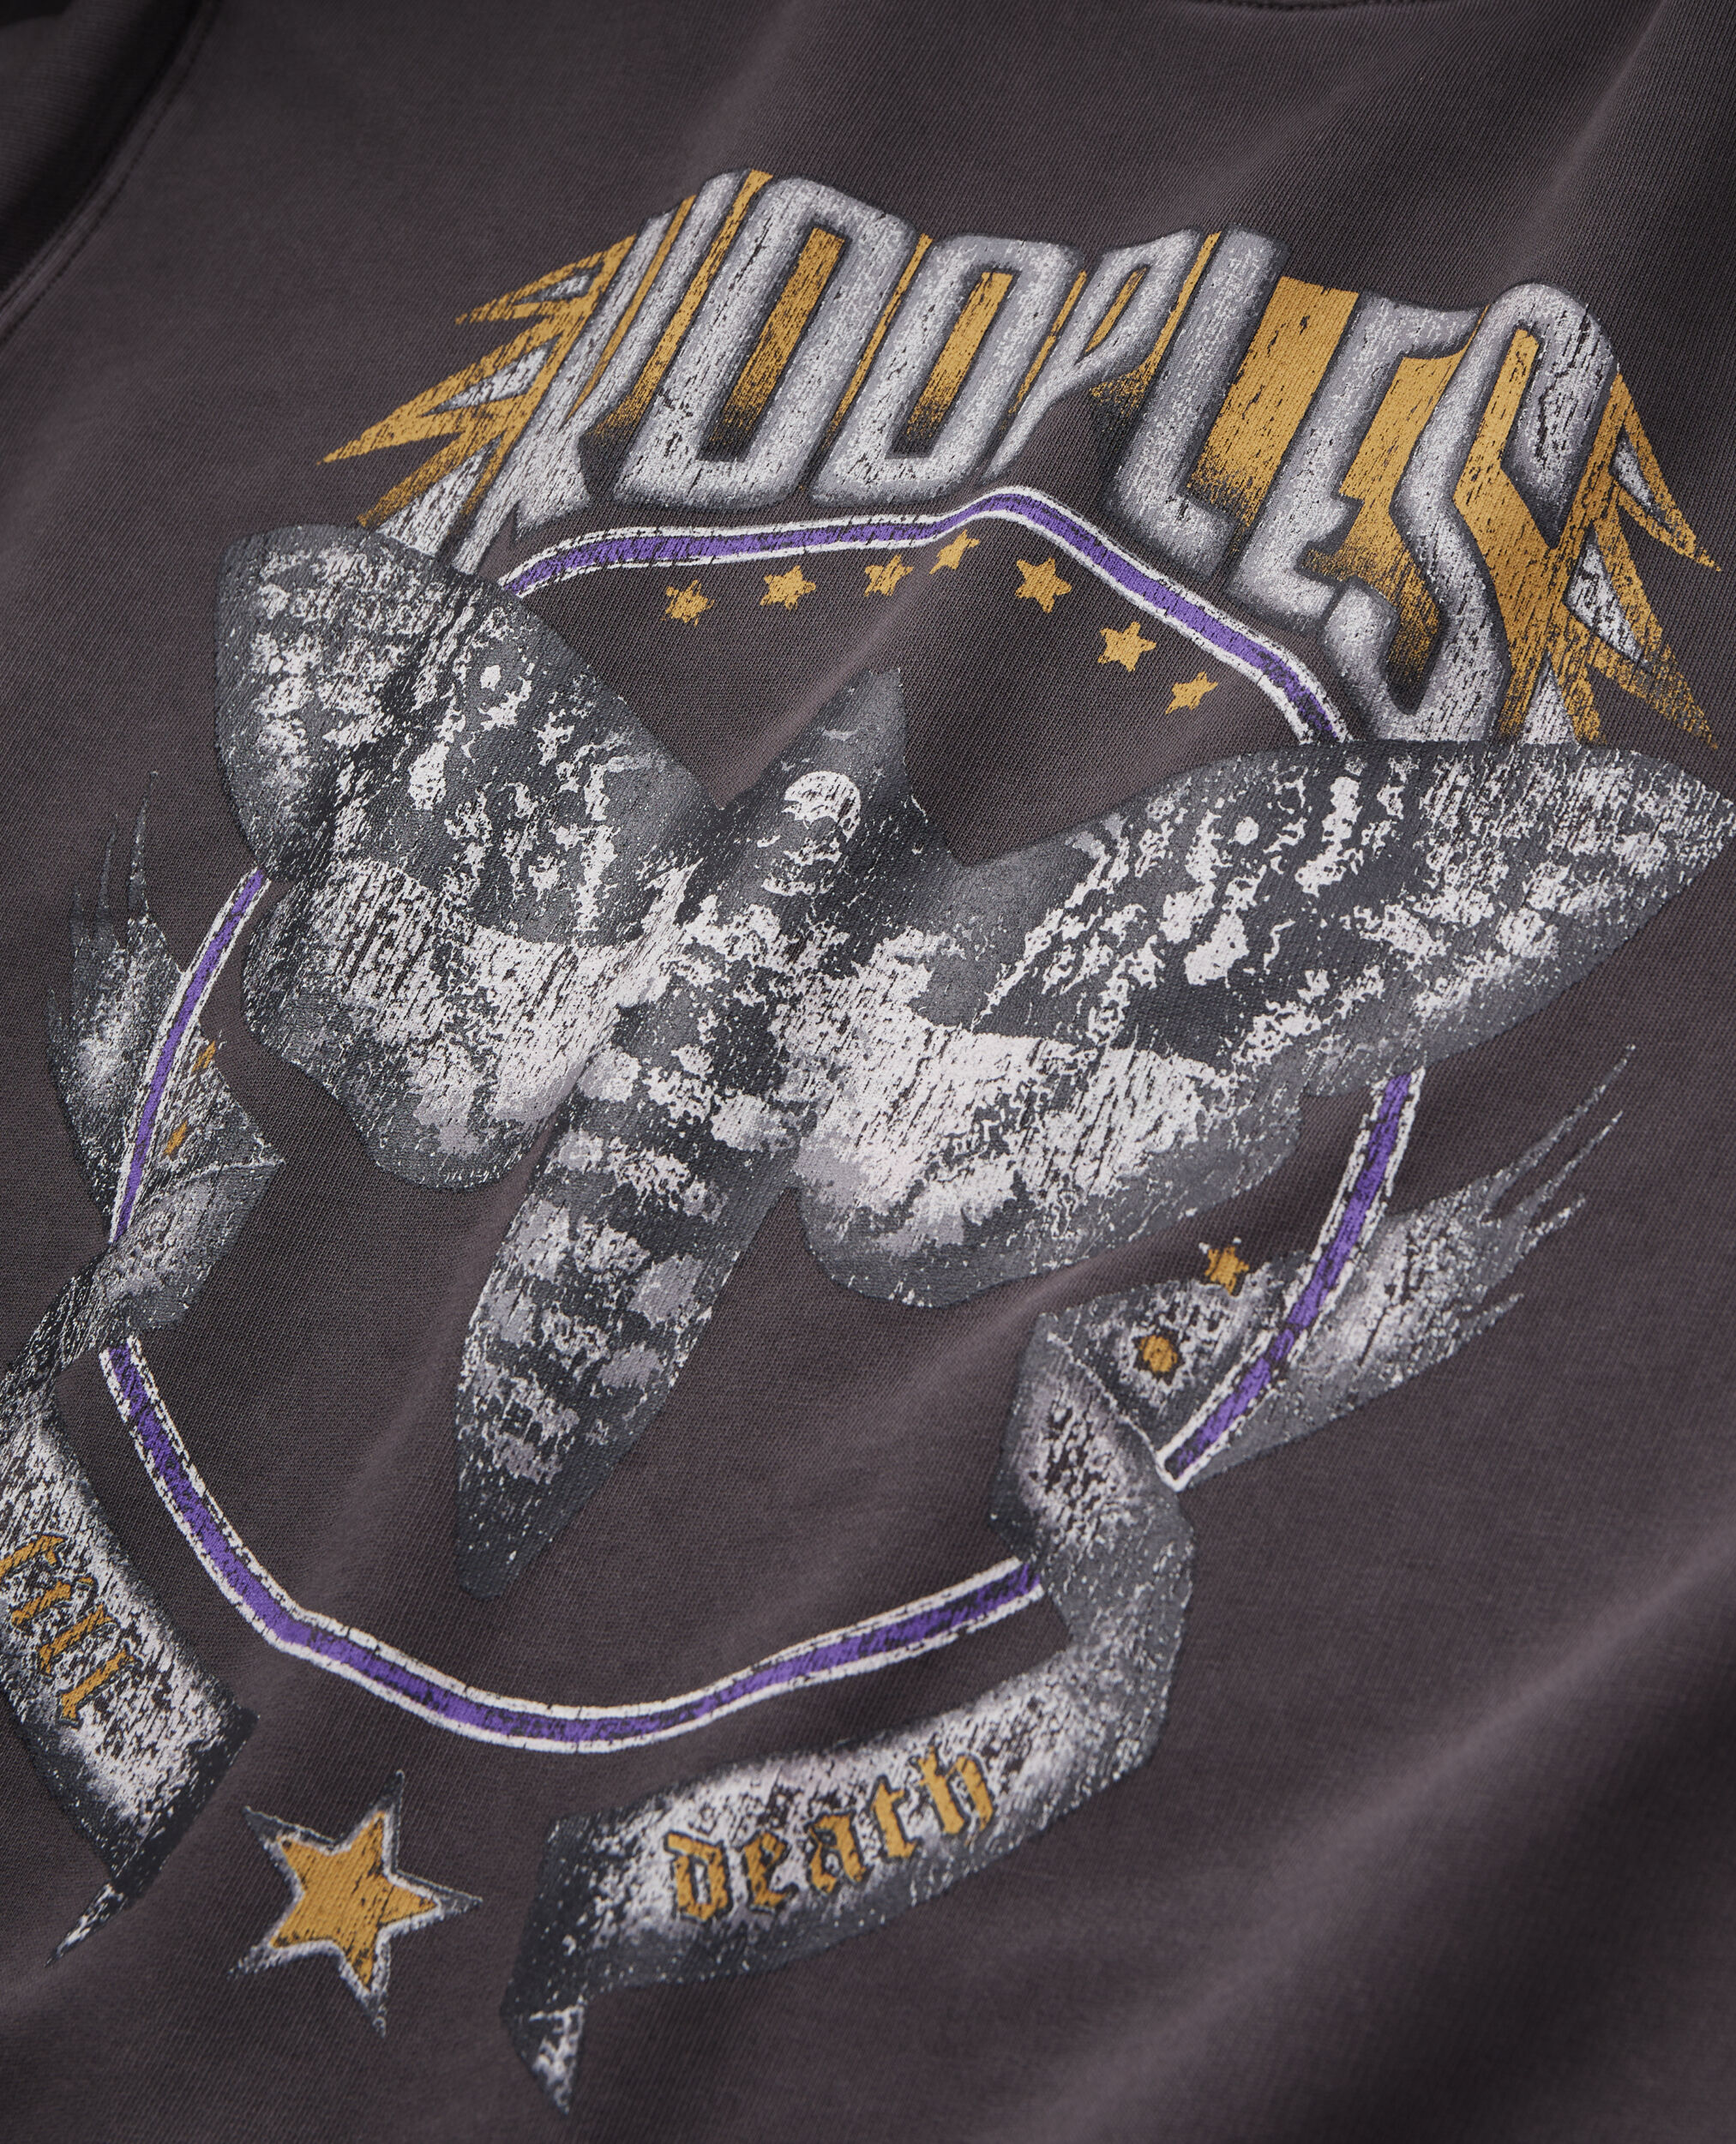 Carbon grey sweatshirt with Skull butterfly serigraphy, CARBONE, hi-res image number null